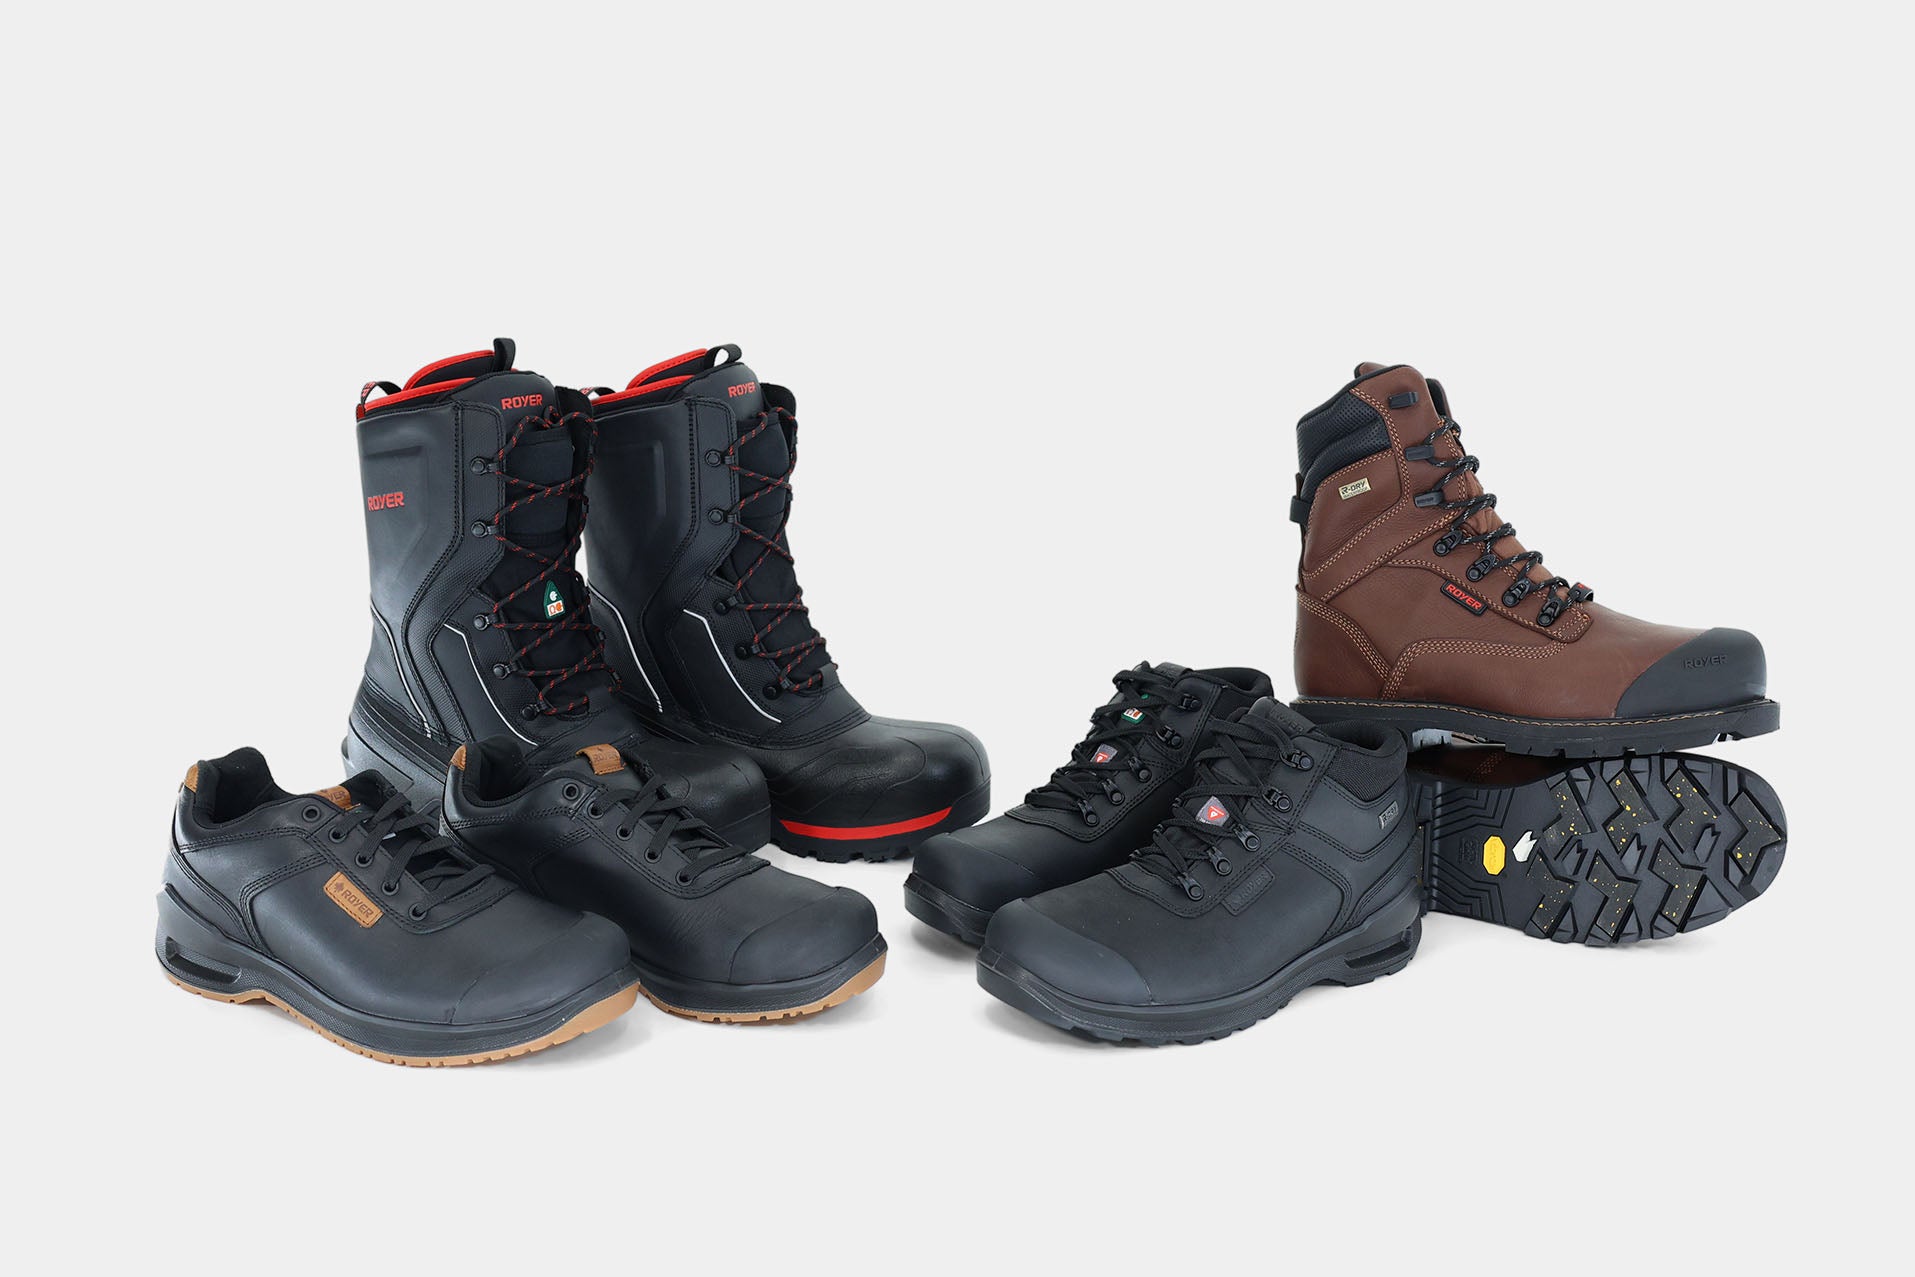 Epik Workwear and Royer Insulated Footwear partnership for work boots